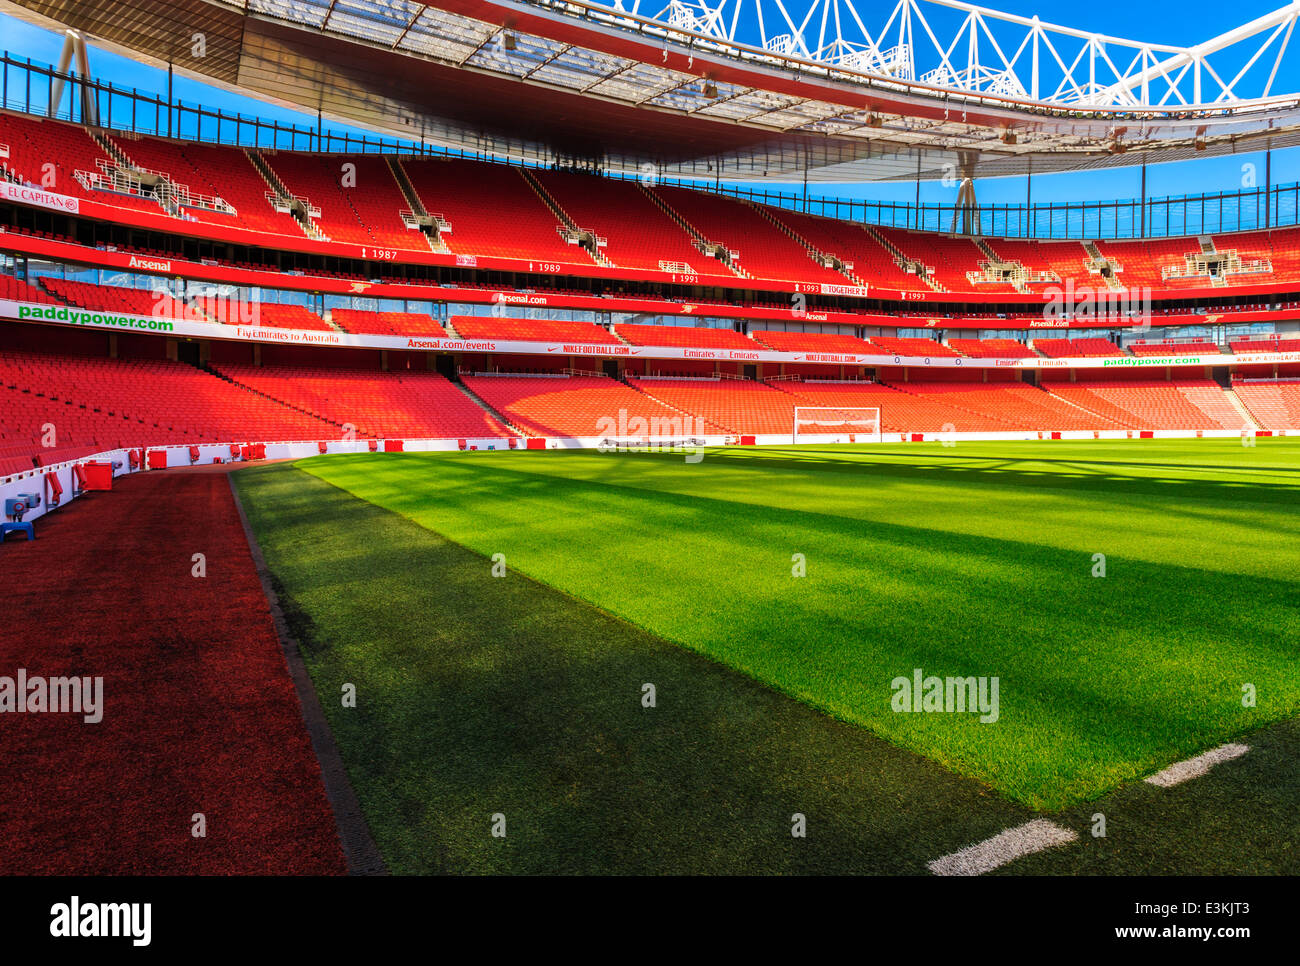 Pitch side, The Emirates Stadium, showing supporter seating. Arsenal Football club. Stock Photo